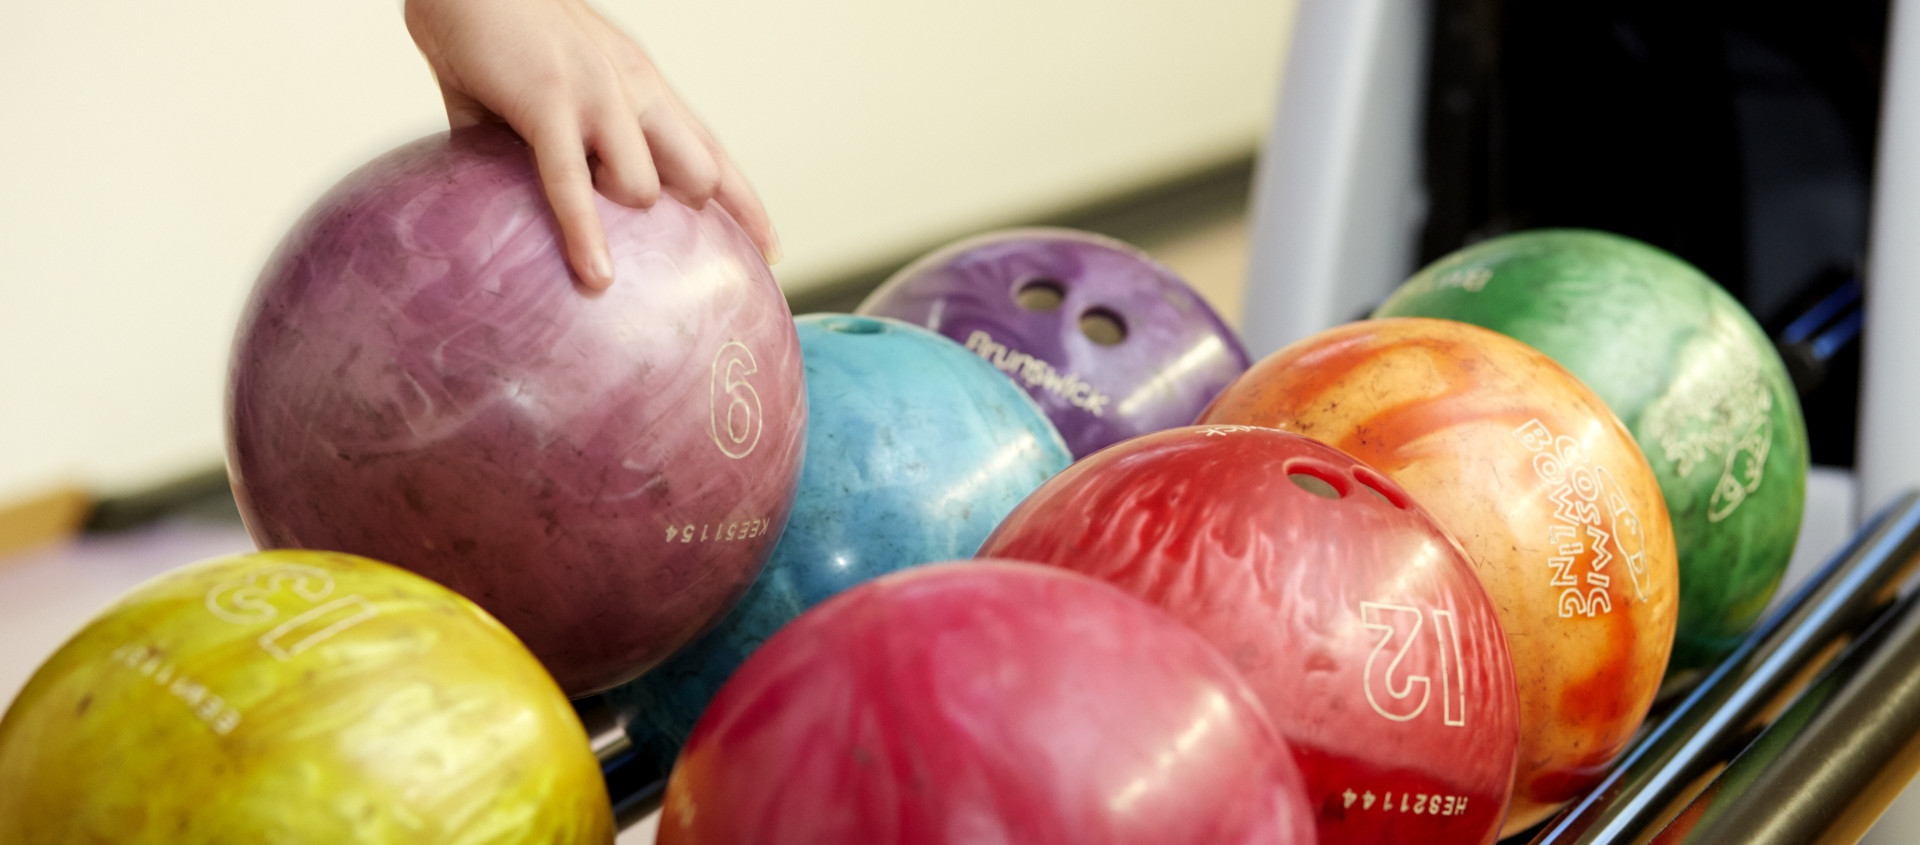 Youth hostel Beaufort - bowling (1)